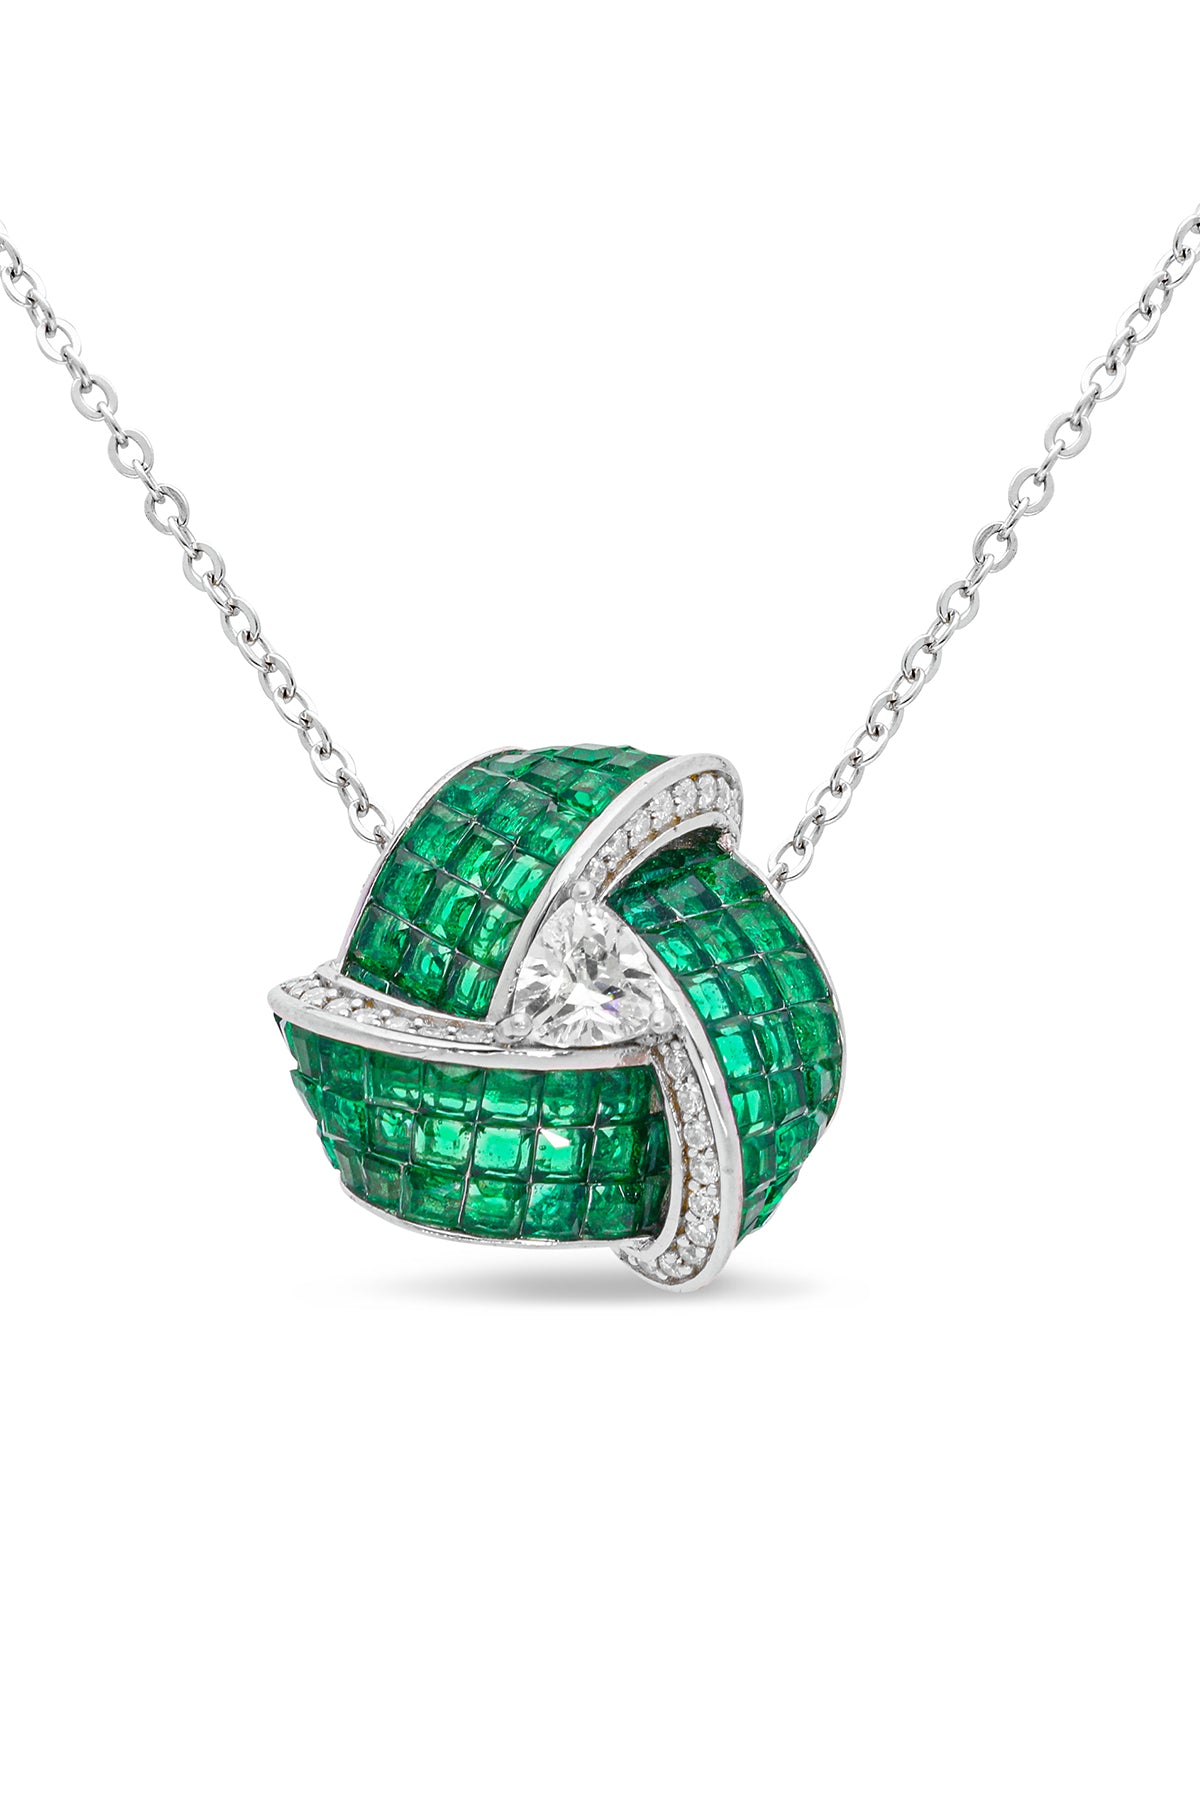 Enchanted Emerald Green Triad Blossom Pendant with Chain